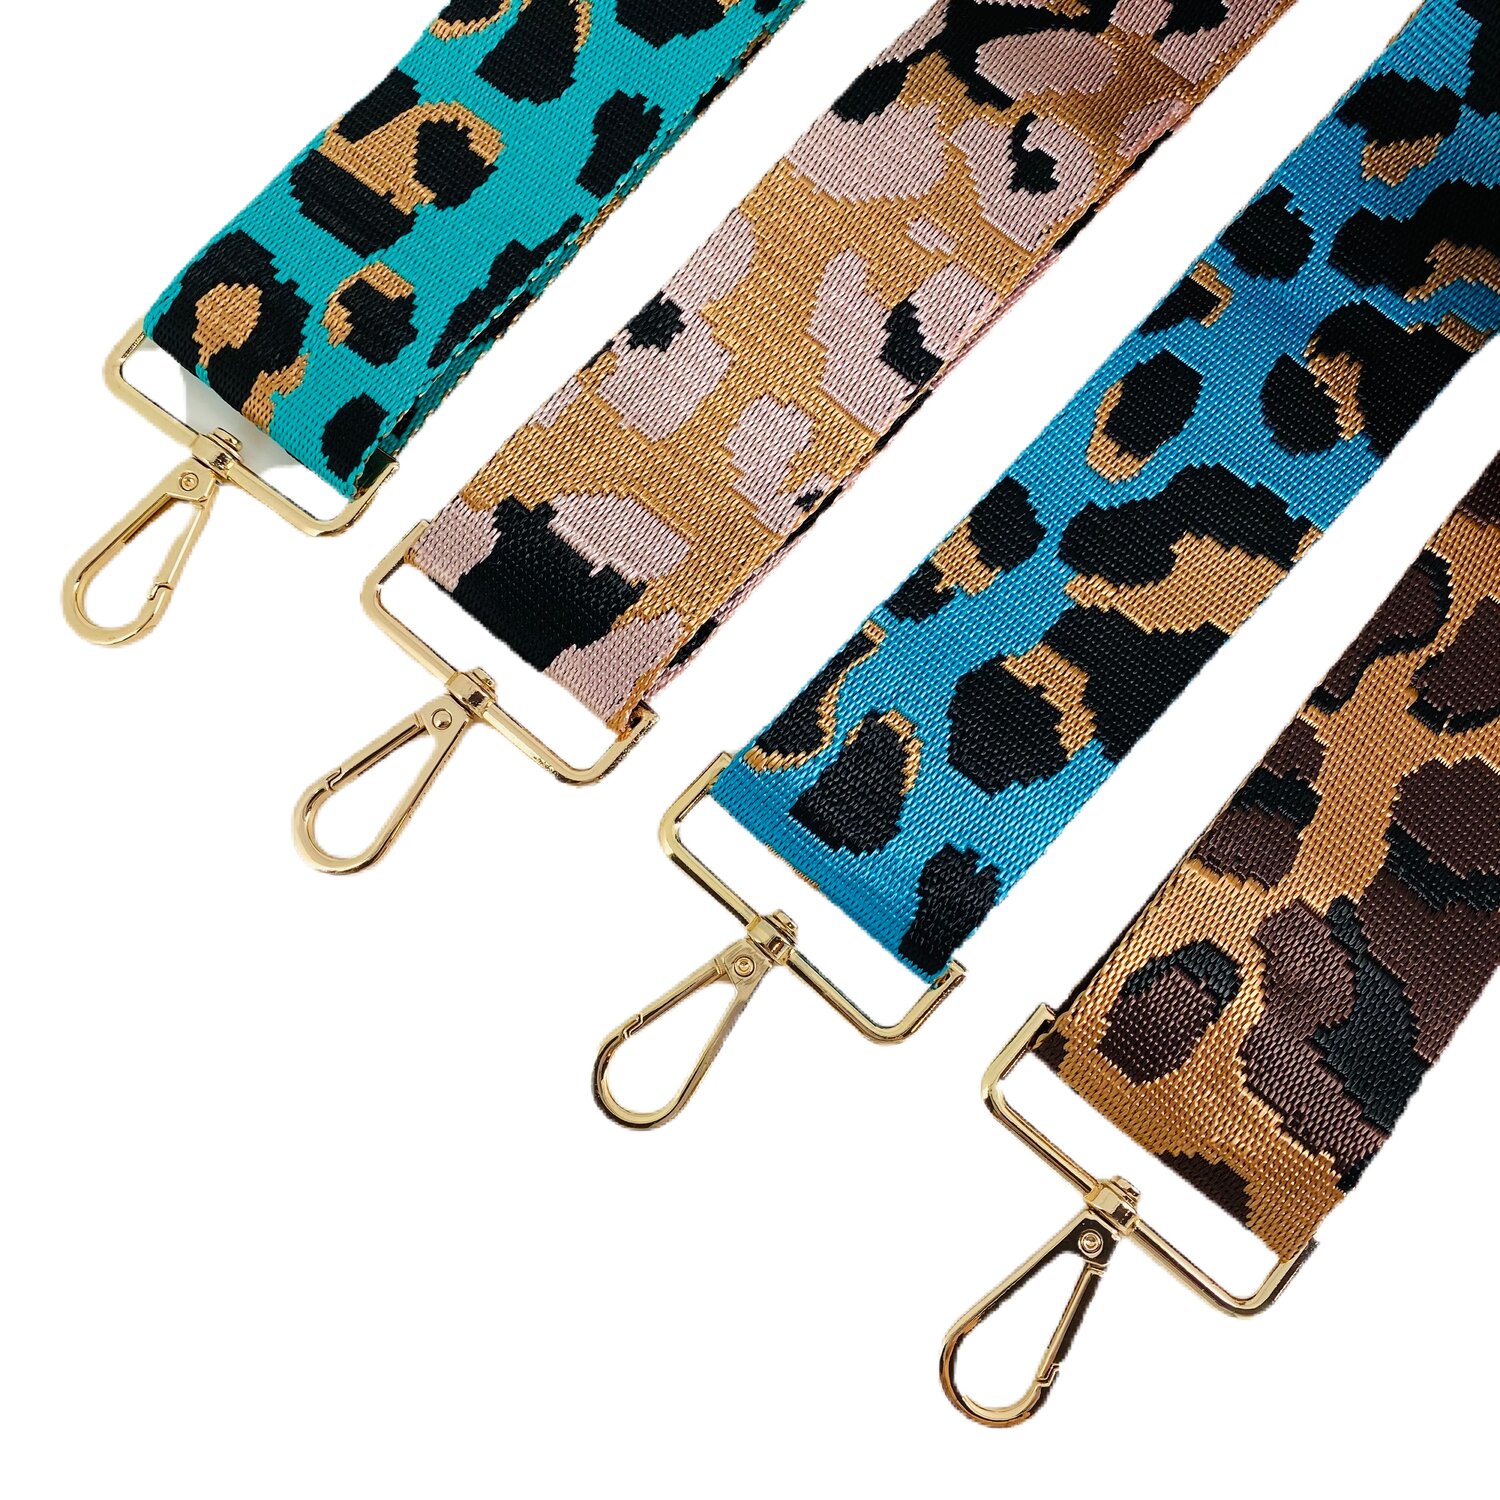 Buy Cheetah Adjustable Purse Strap Replacement Online